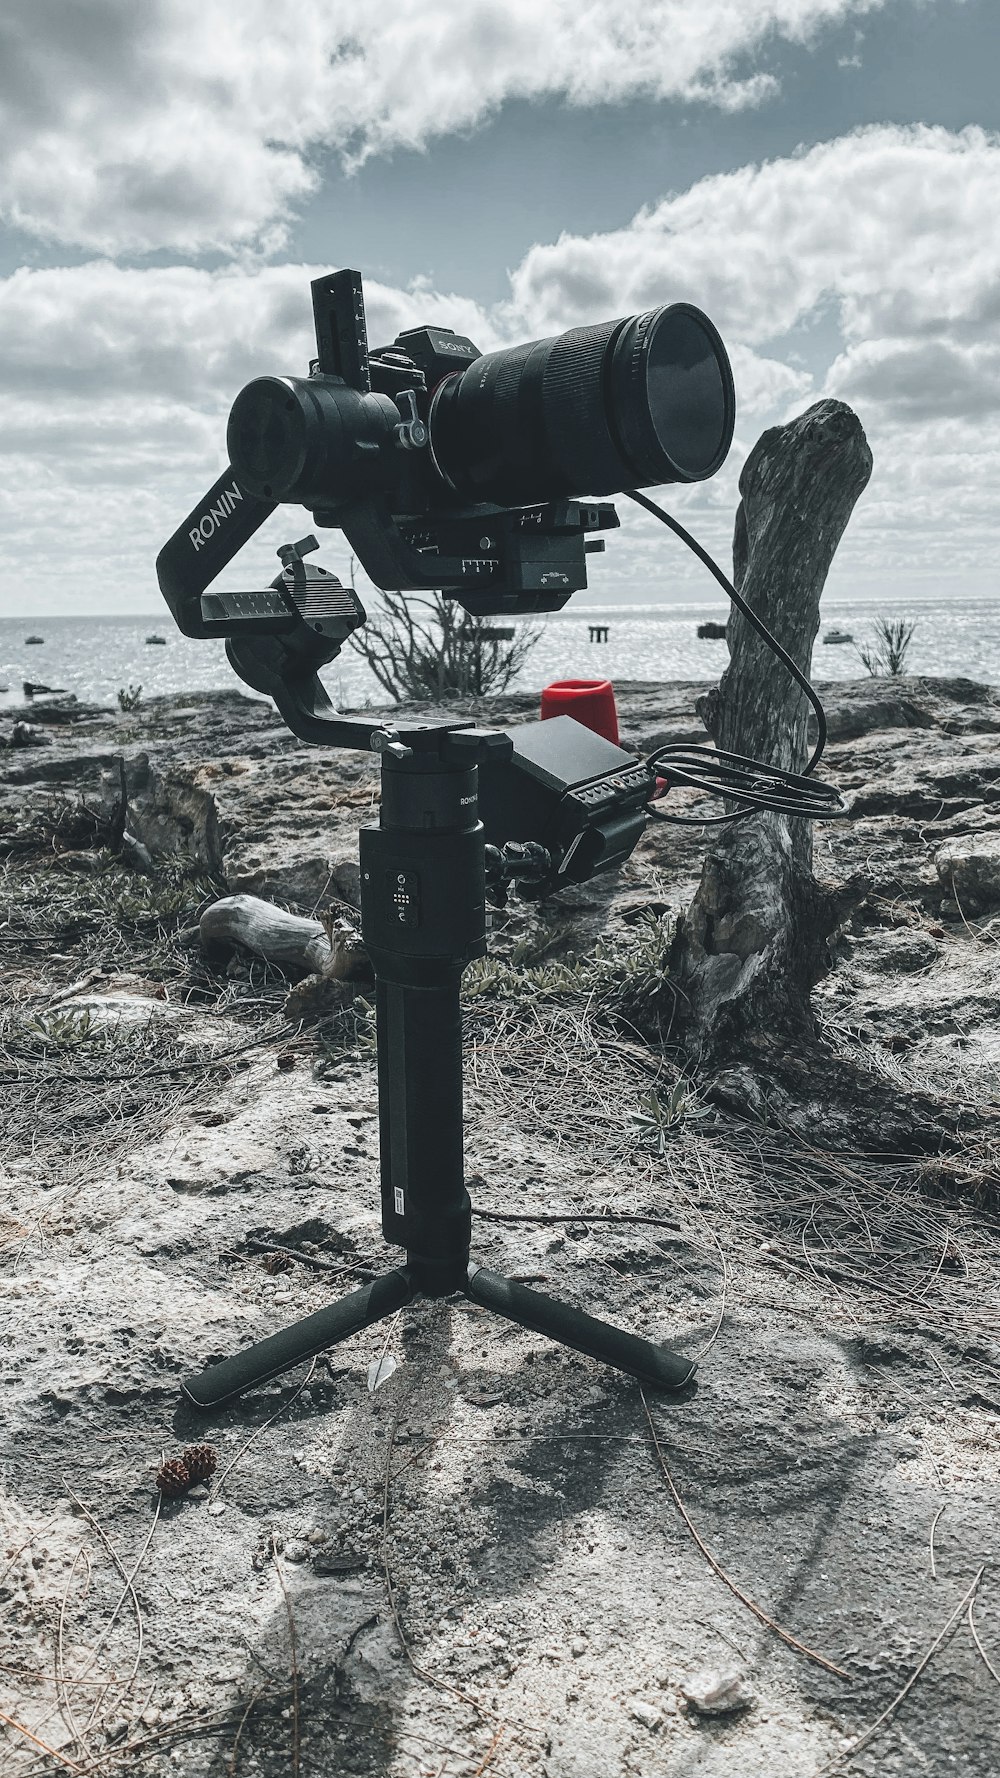 black camera on tripod on rocky shore during daytime